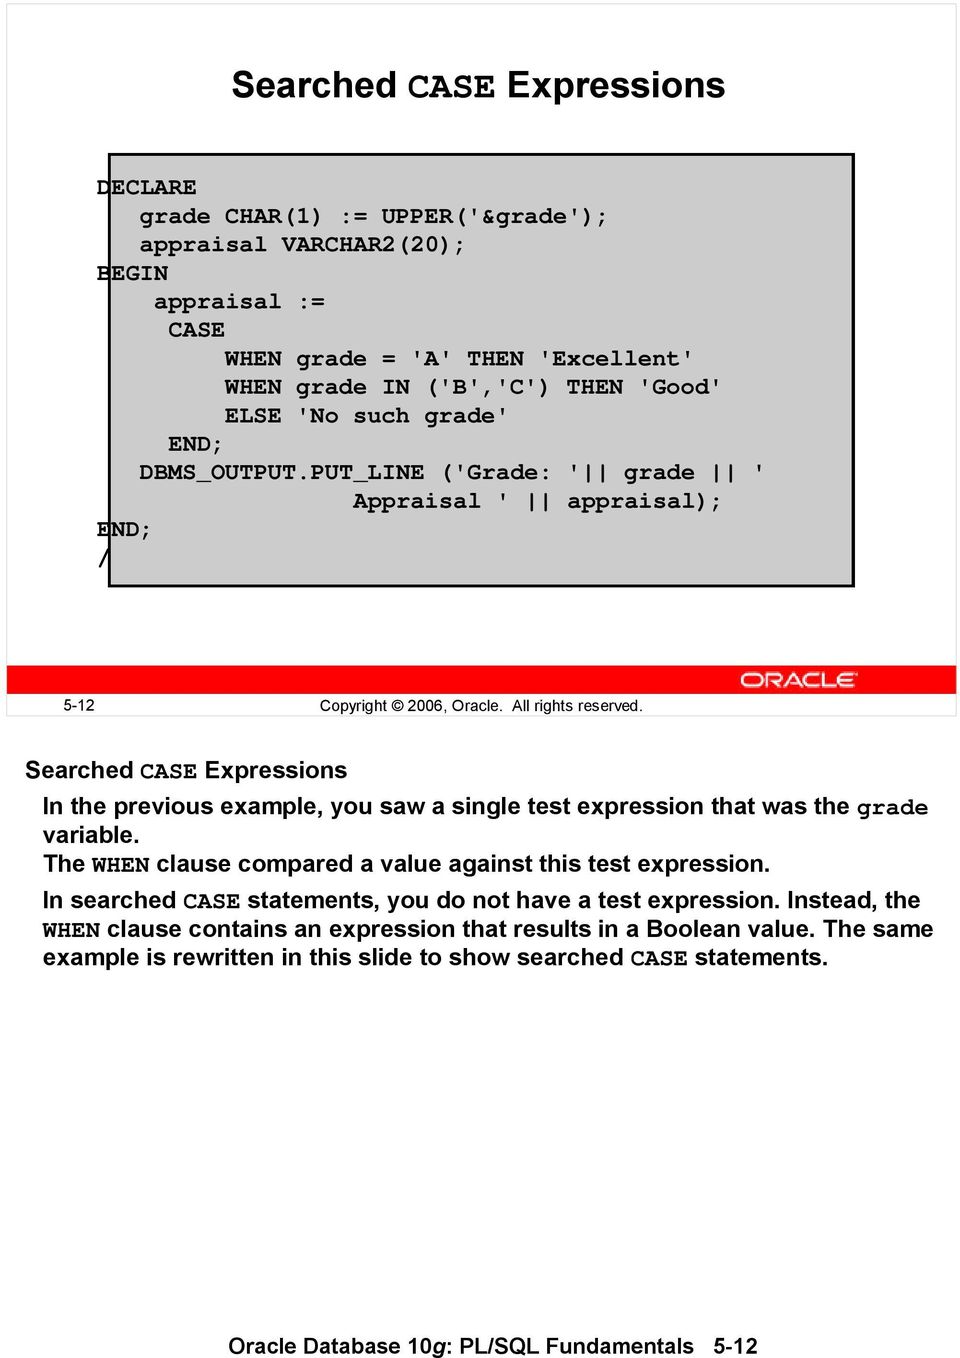 Searched CASE Expressions In the previous example, you saw a single test expression that was the grade variable. The WHEN clause compared a value against this test expression.